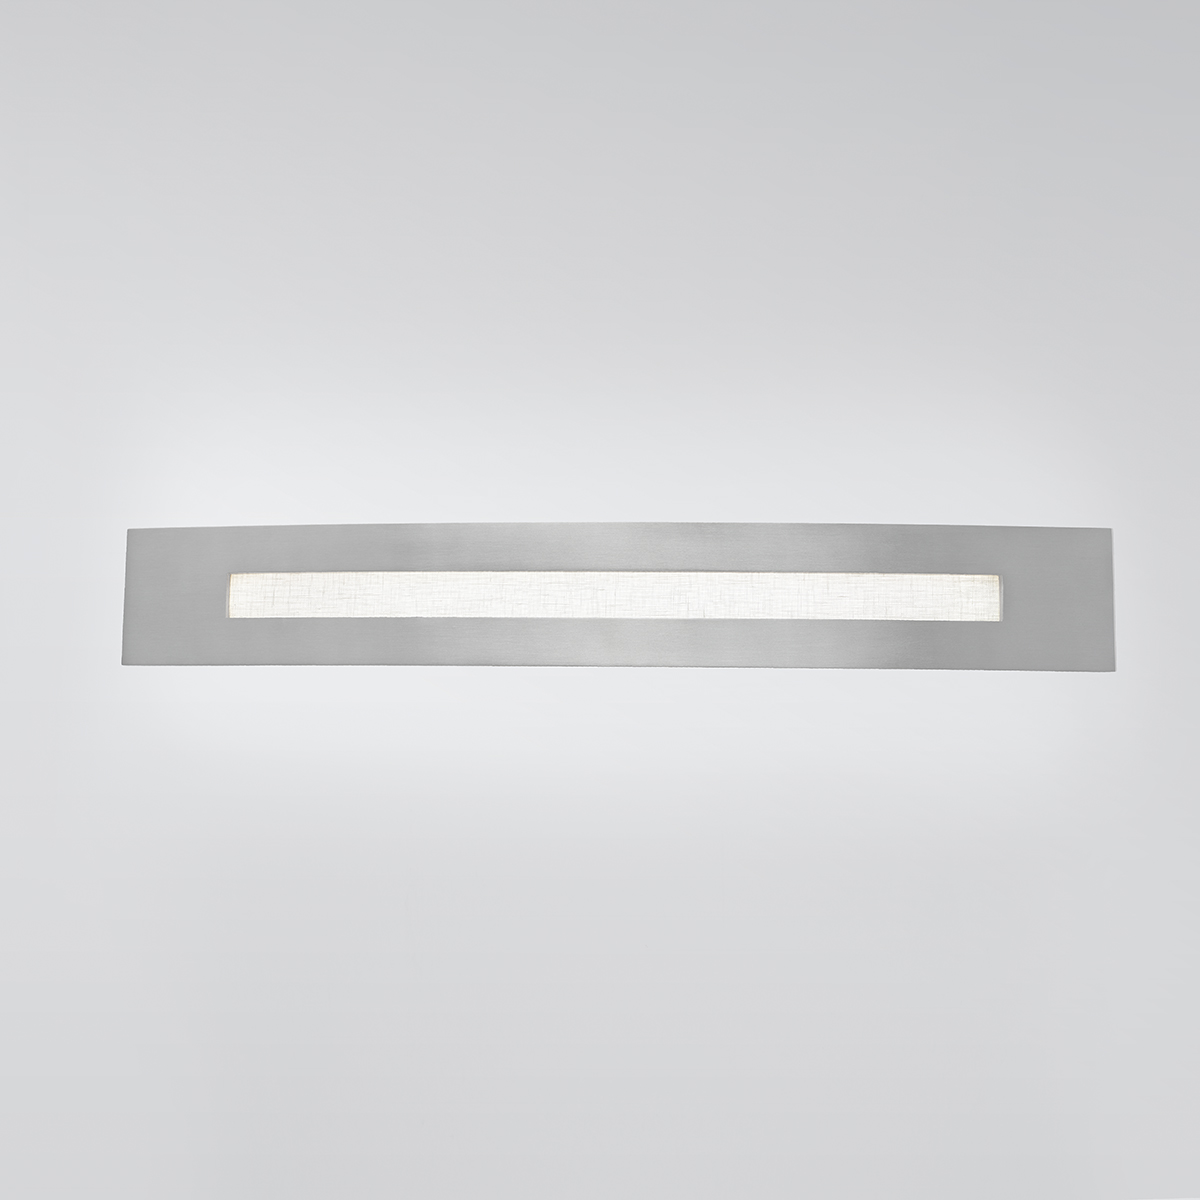 A long, horizontal, multi-sided wall sconce with diffuse light cutouts 